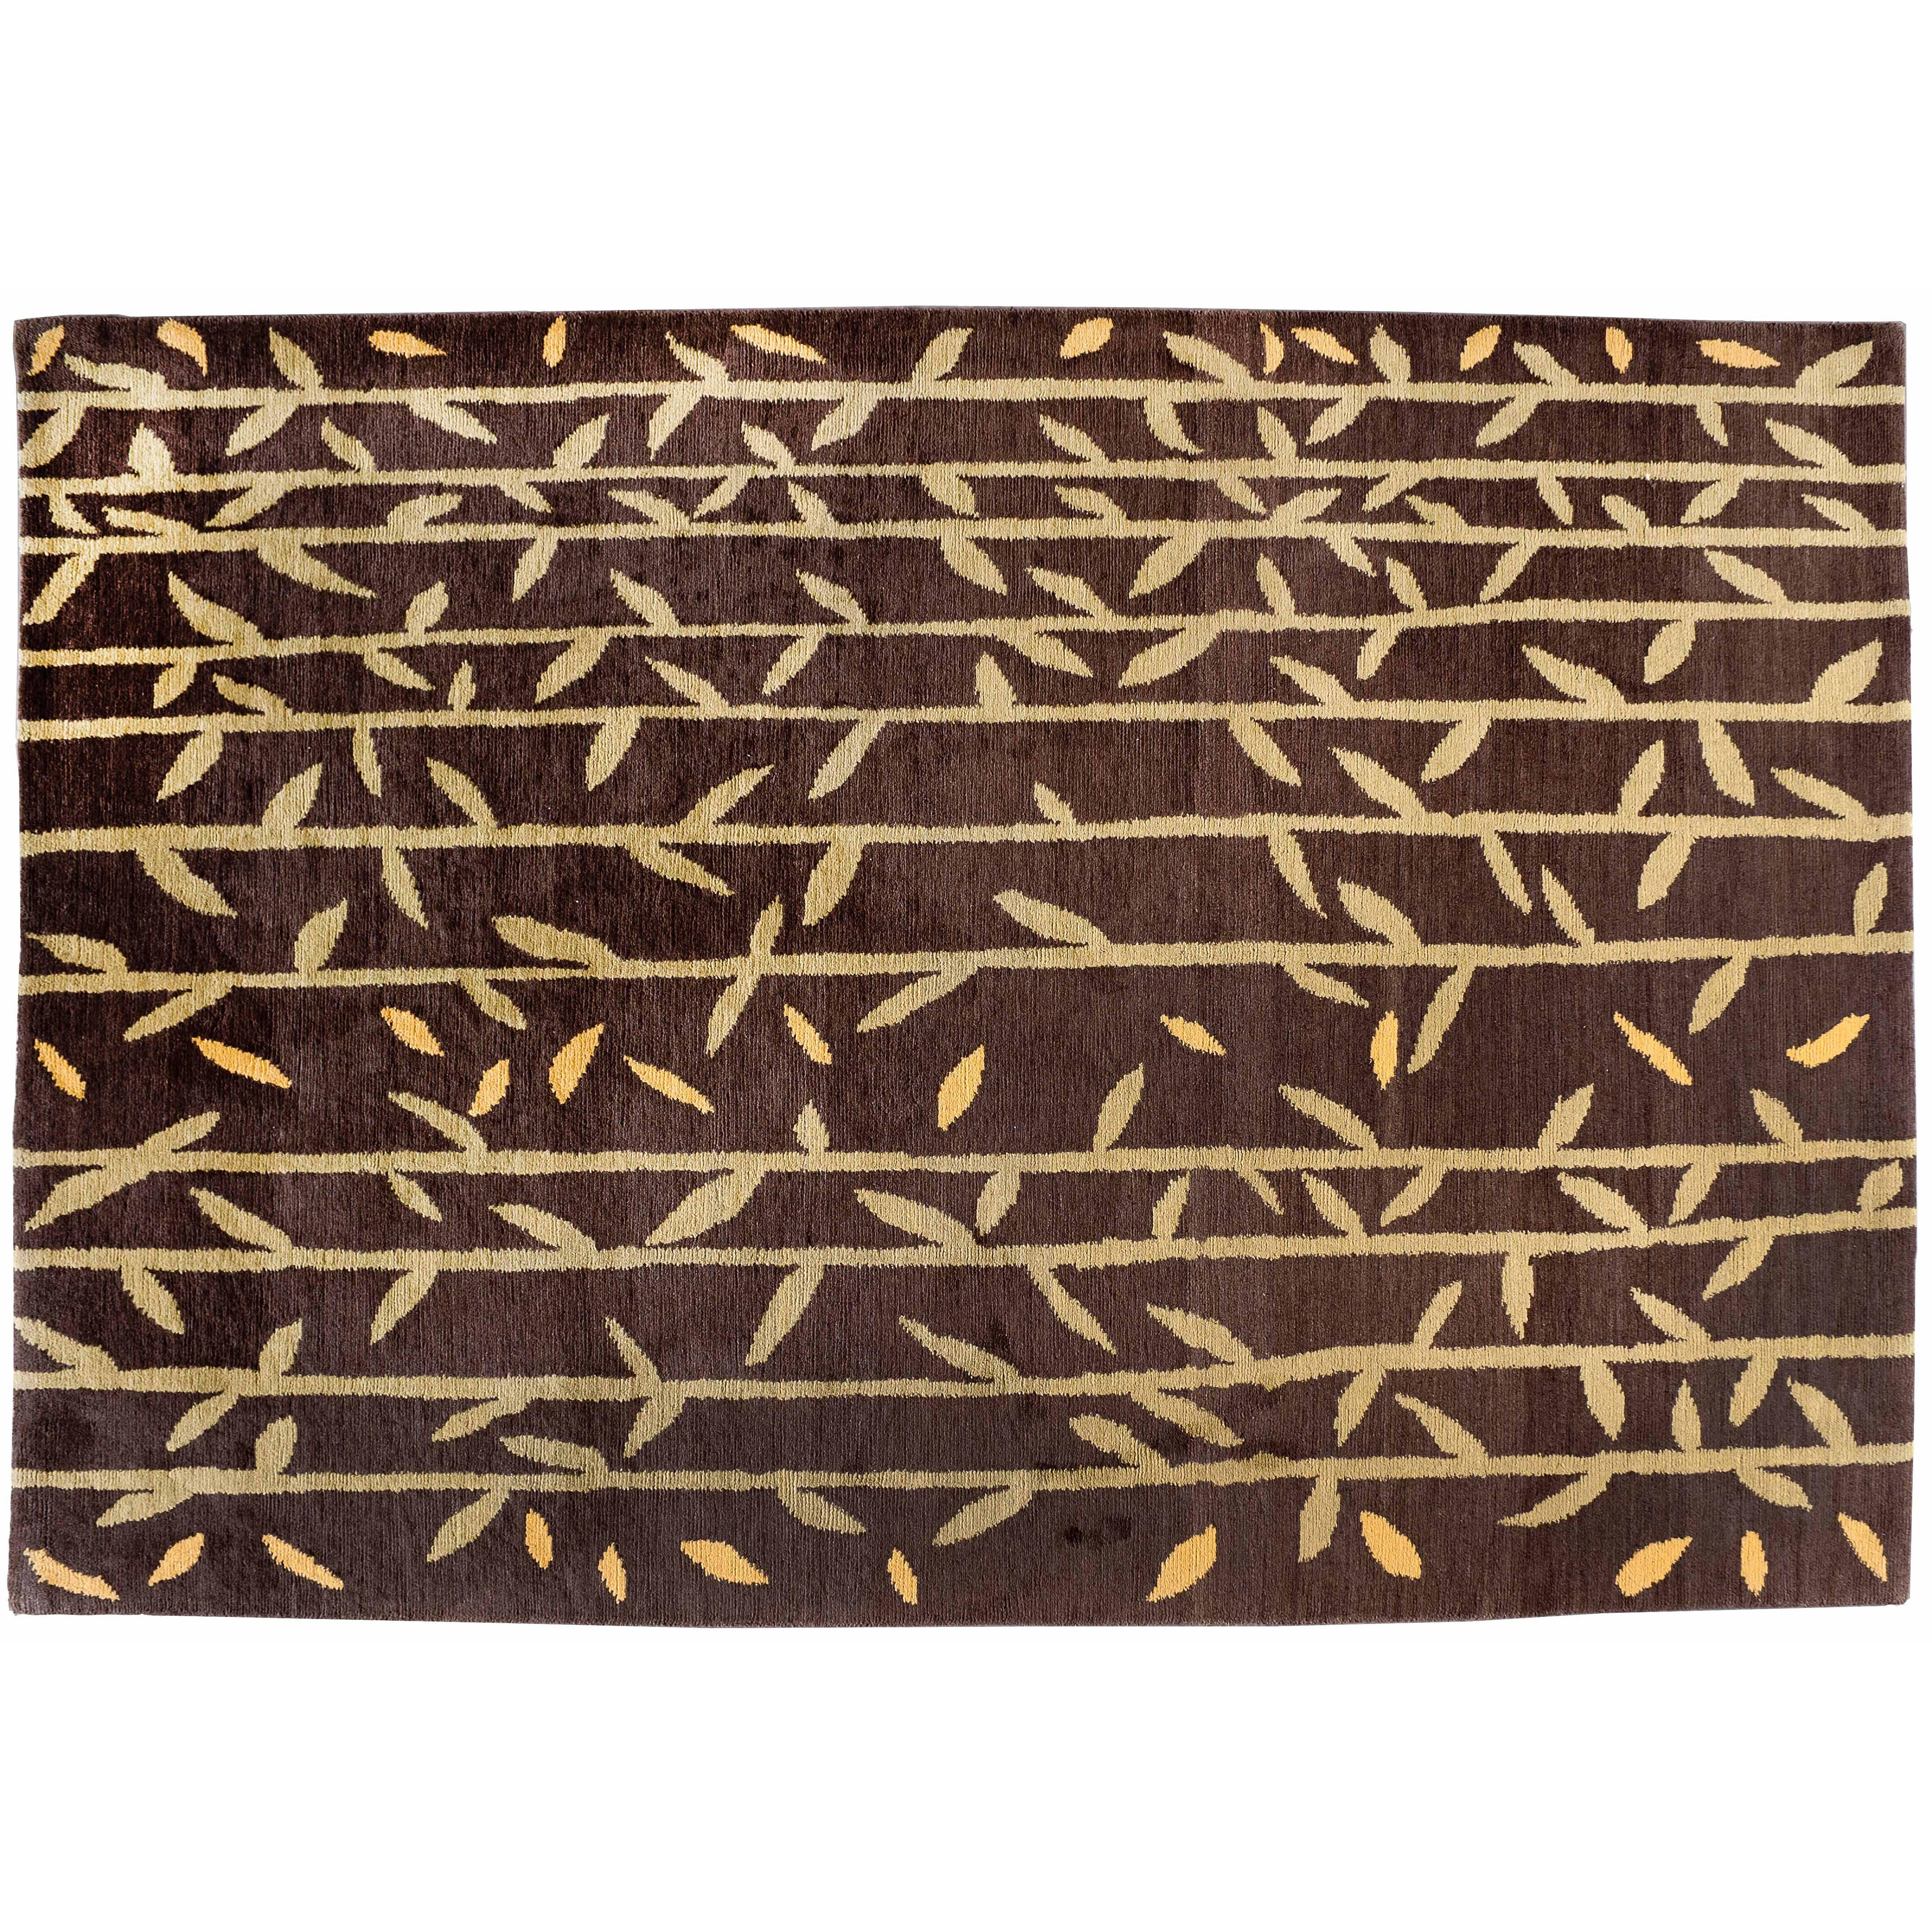 Bamboo Pattern Rug For Sale